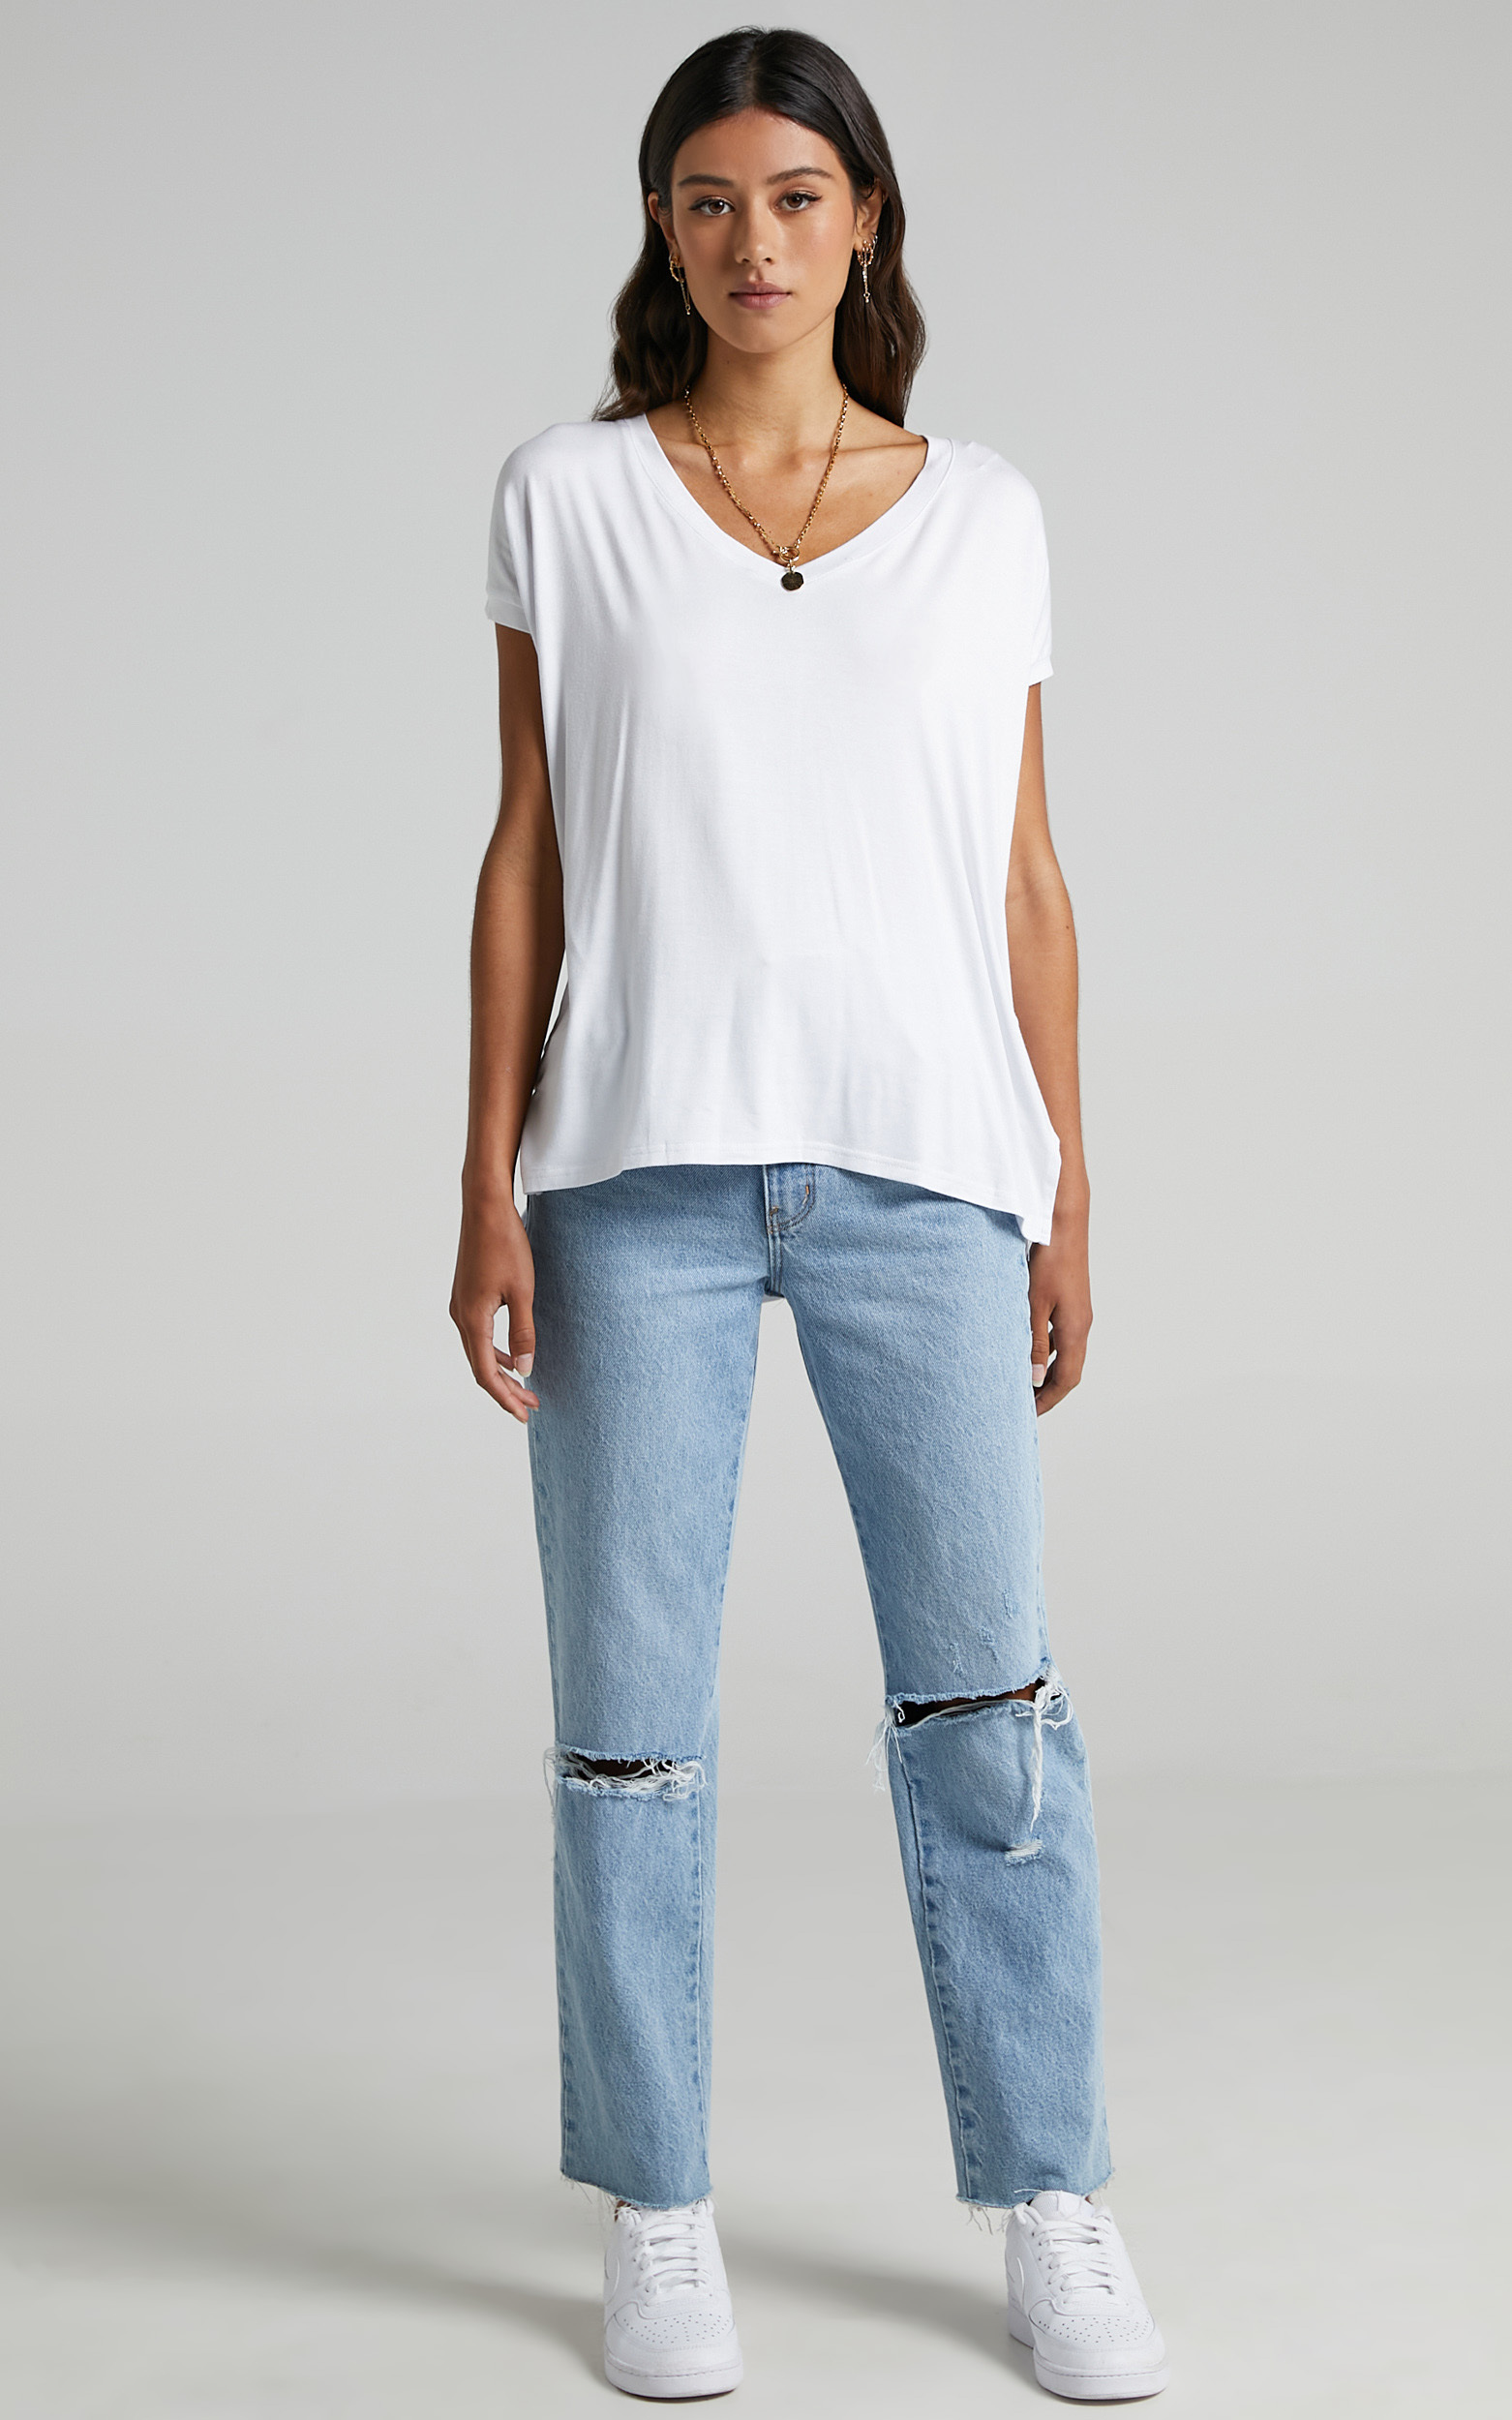 Back To Basics top in white - 4 (XXS), White, hi-res image number null